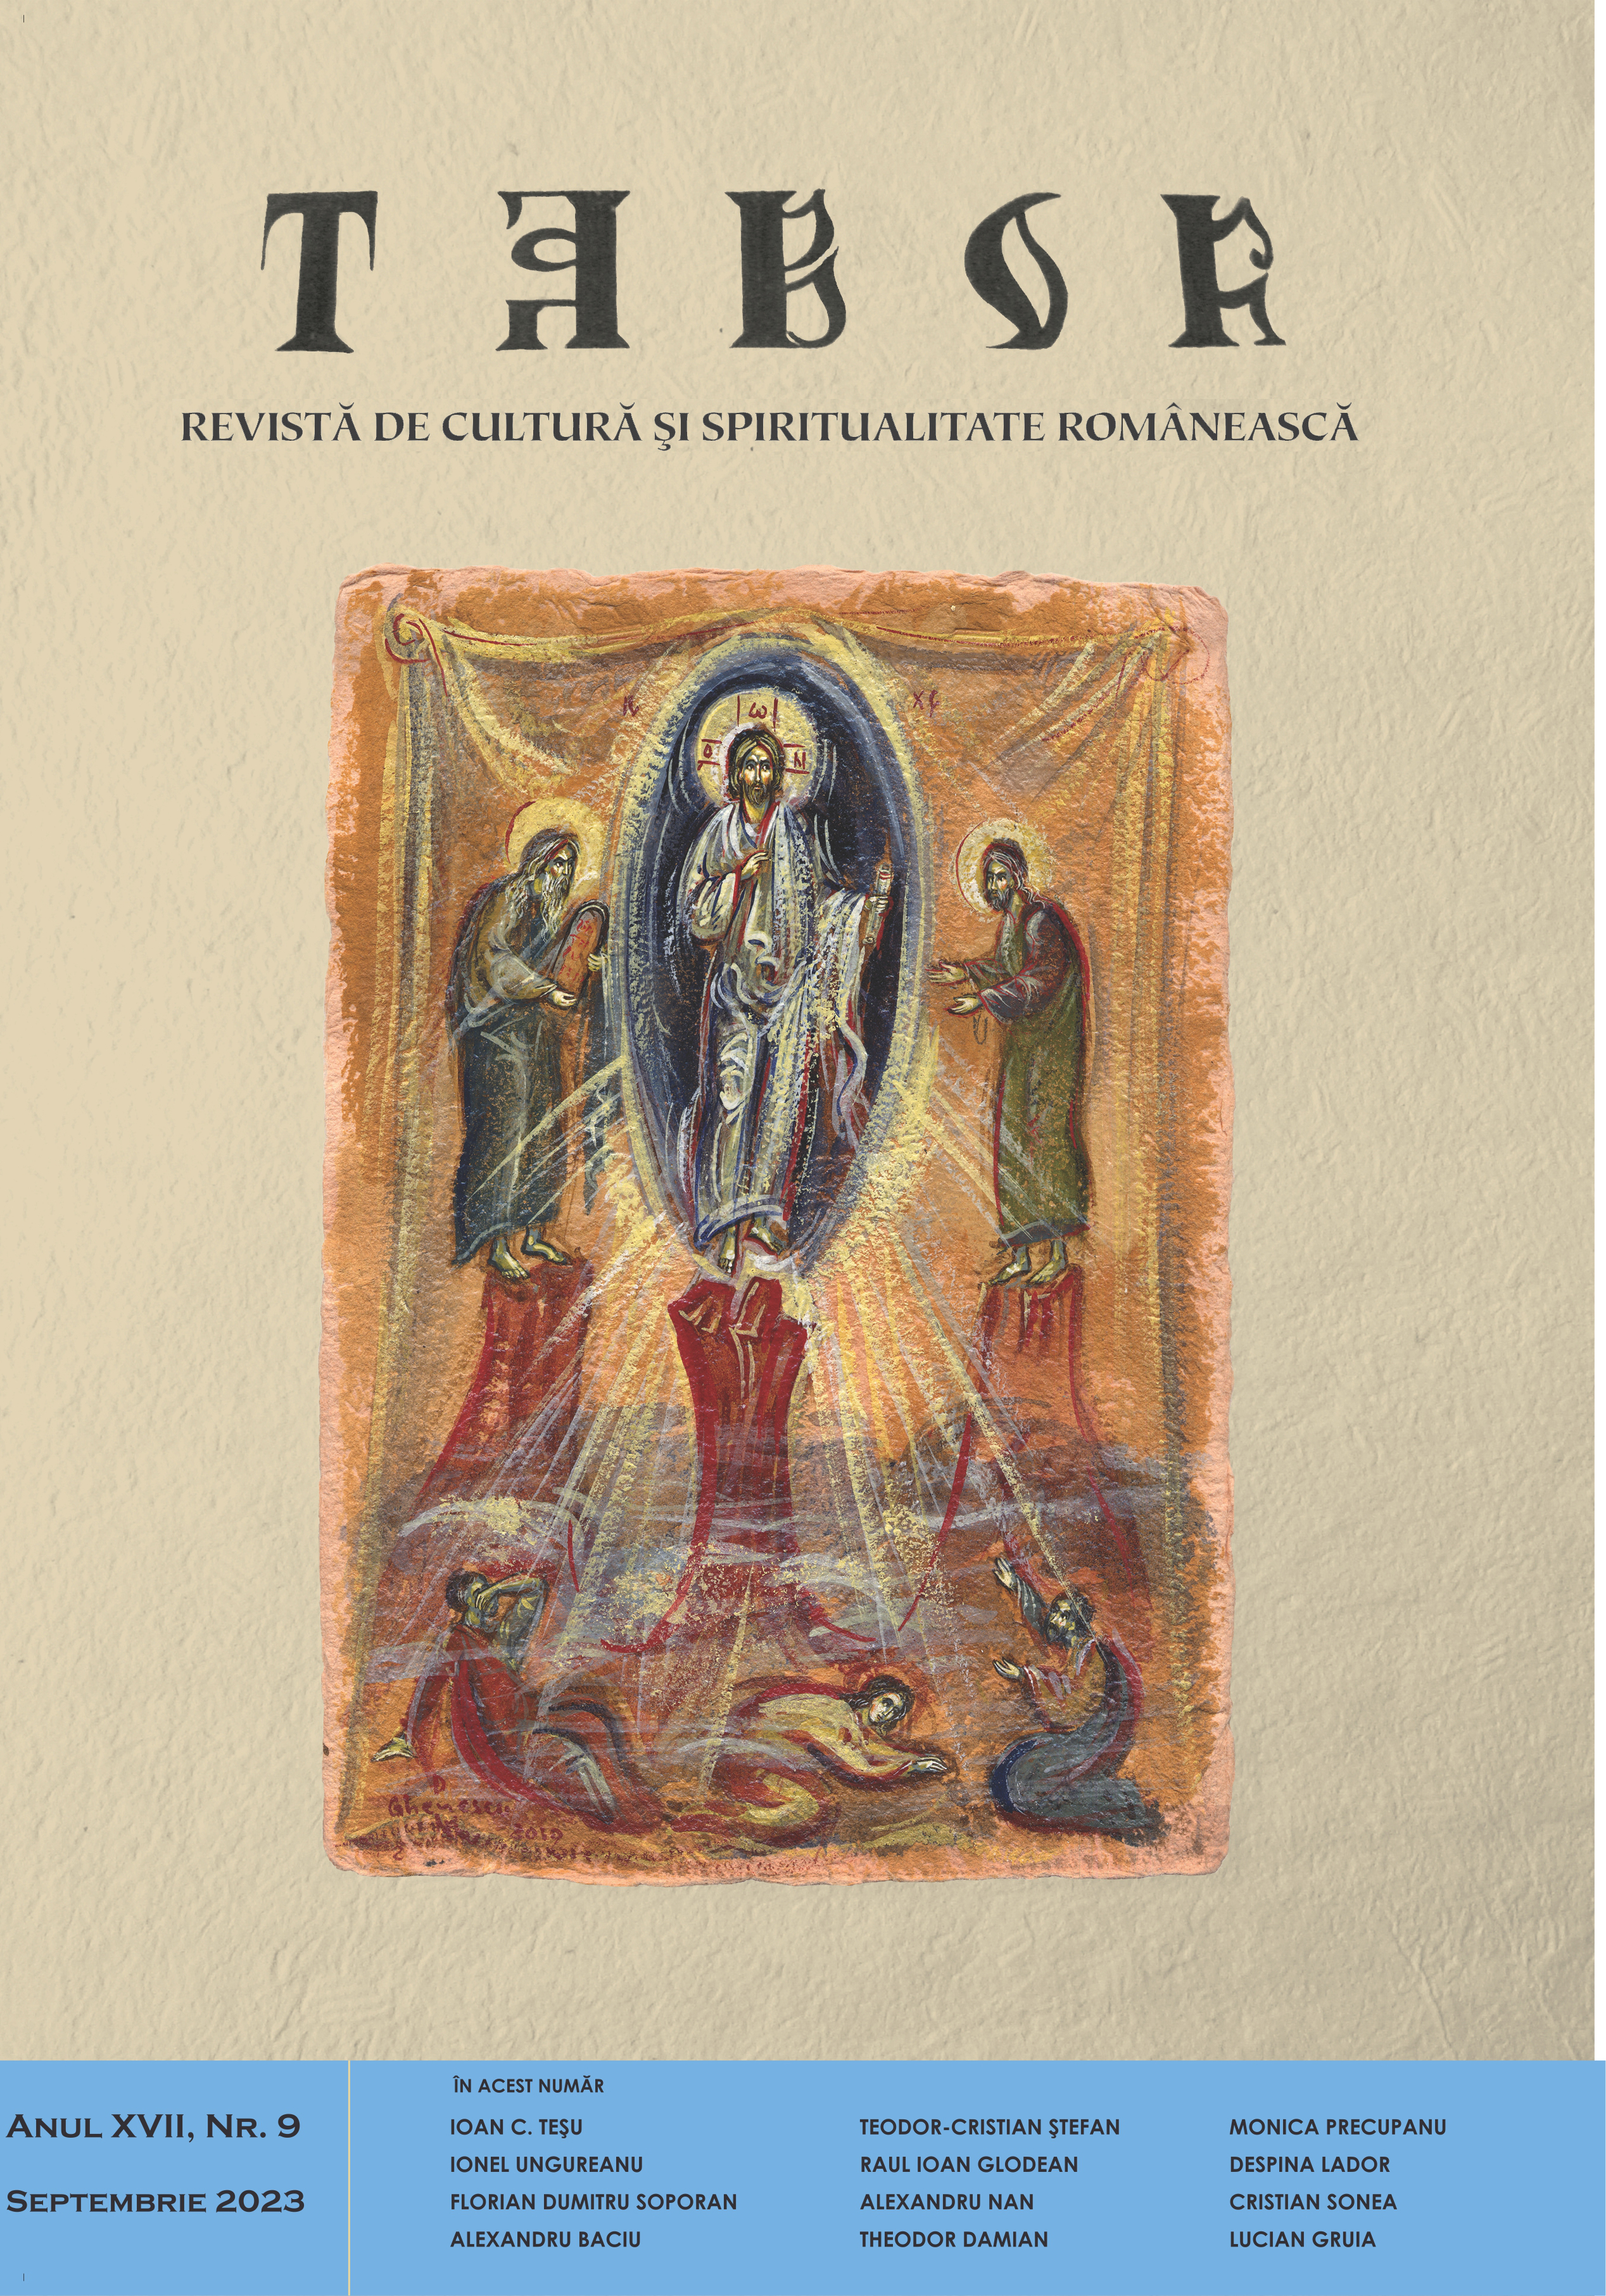 Personalization of the liturgical Cover Image